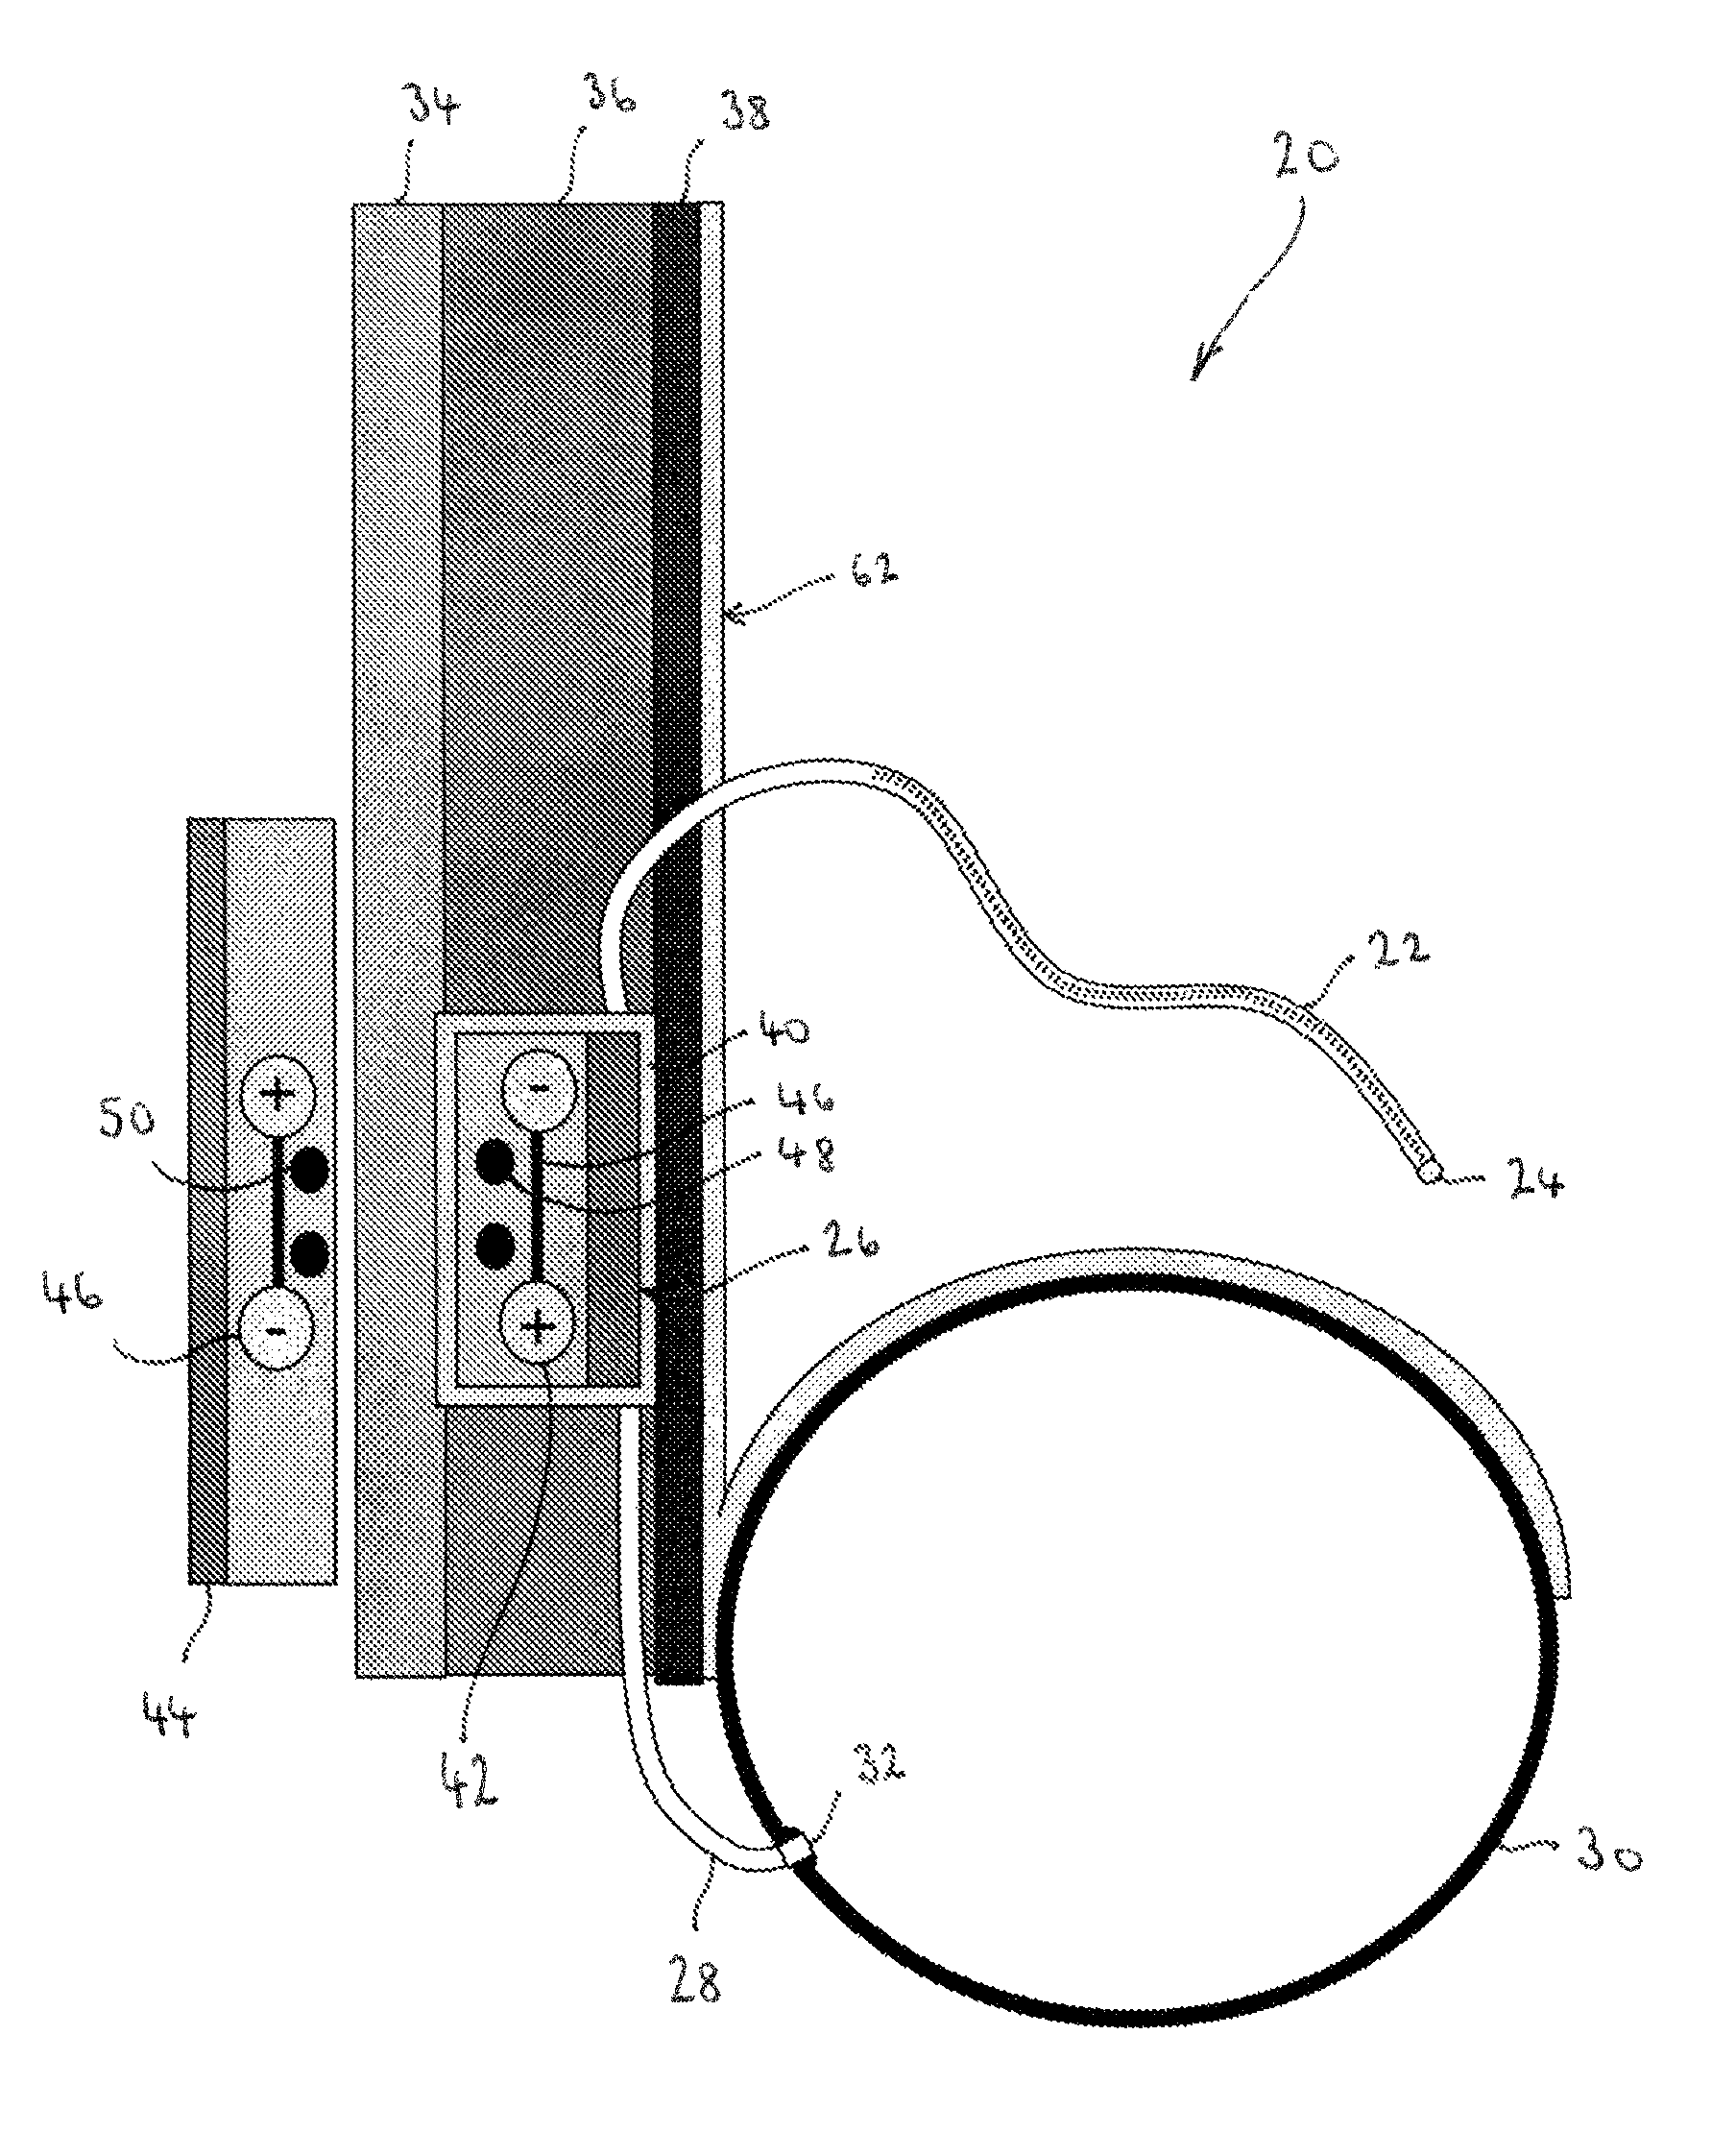 Implantable fluid management device for the removal of excess fluid